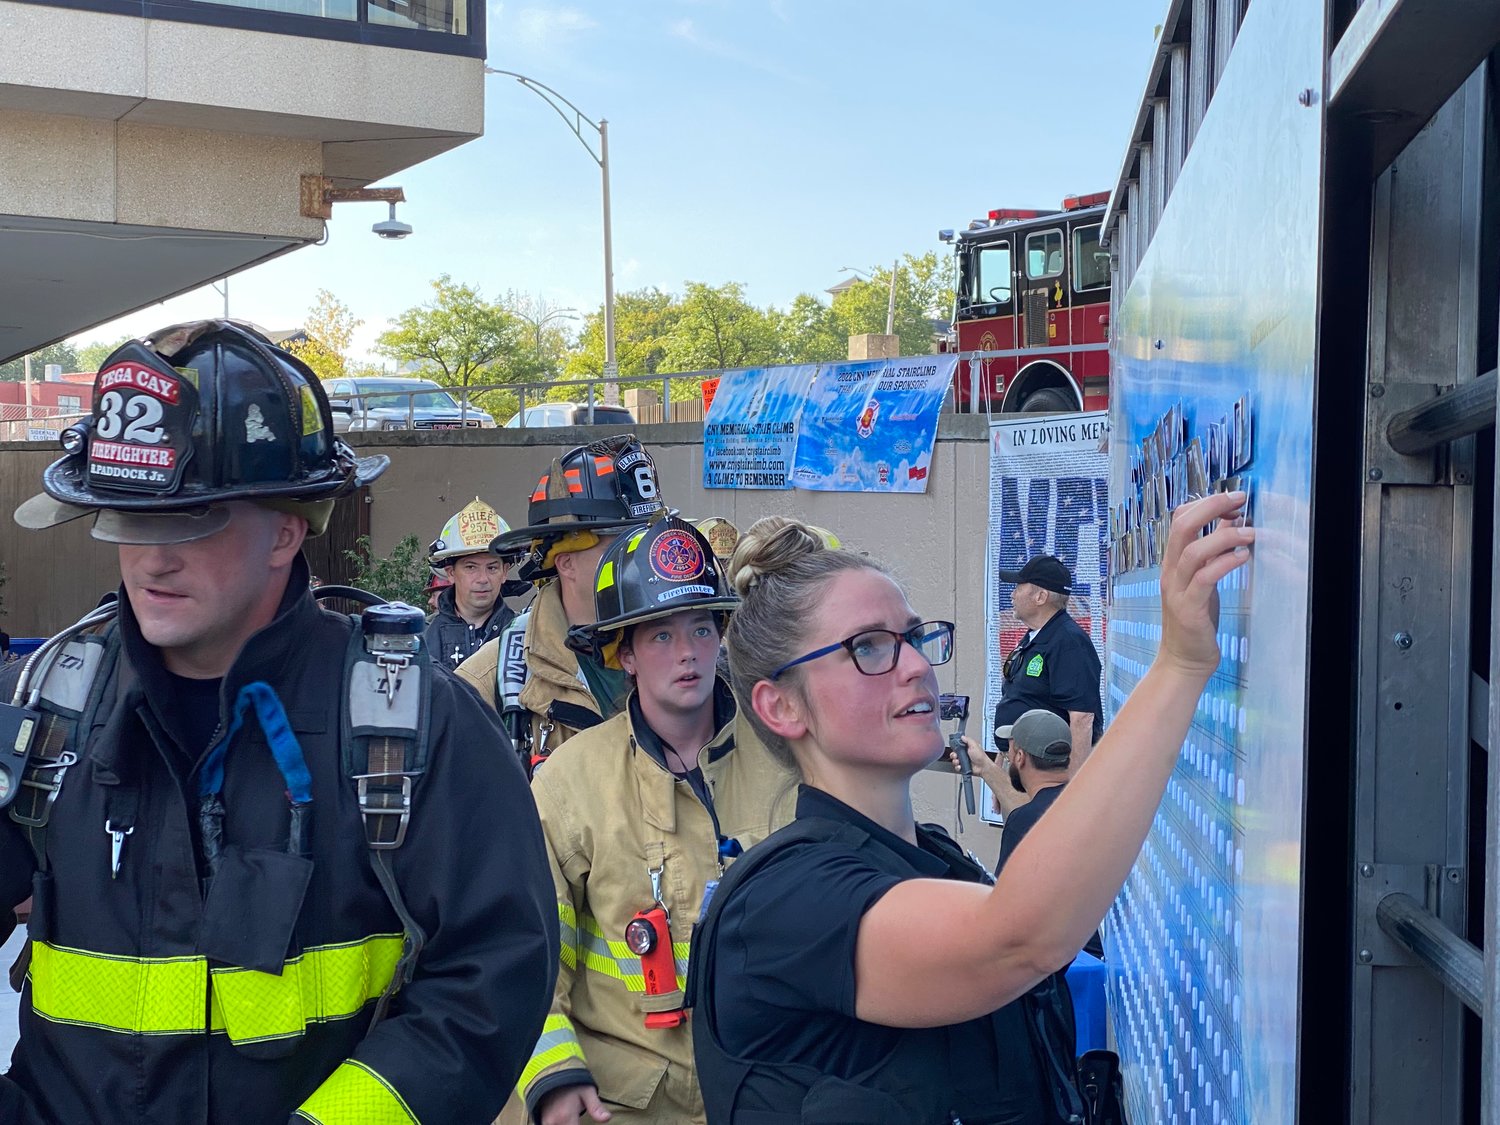 A first responder completes the Central New York Memorial Stair Climb and places the name and photo of a person who passed away during 9/11 on the memorial wall.